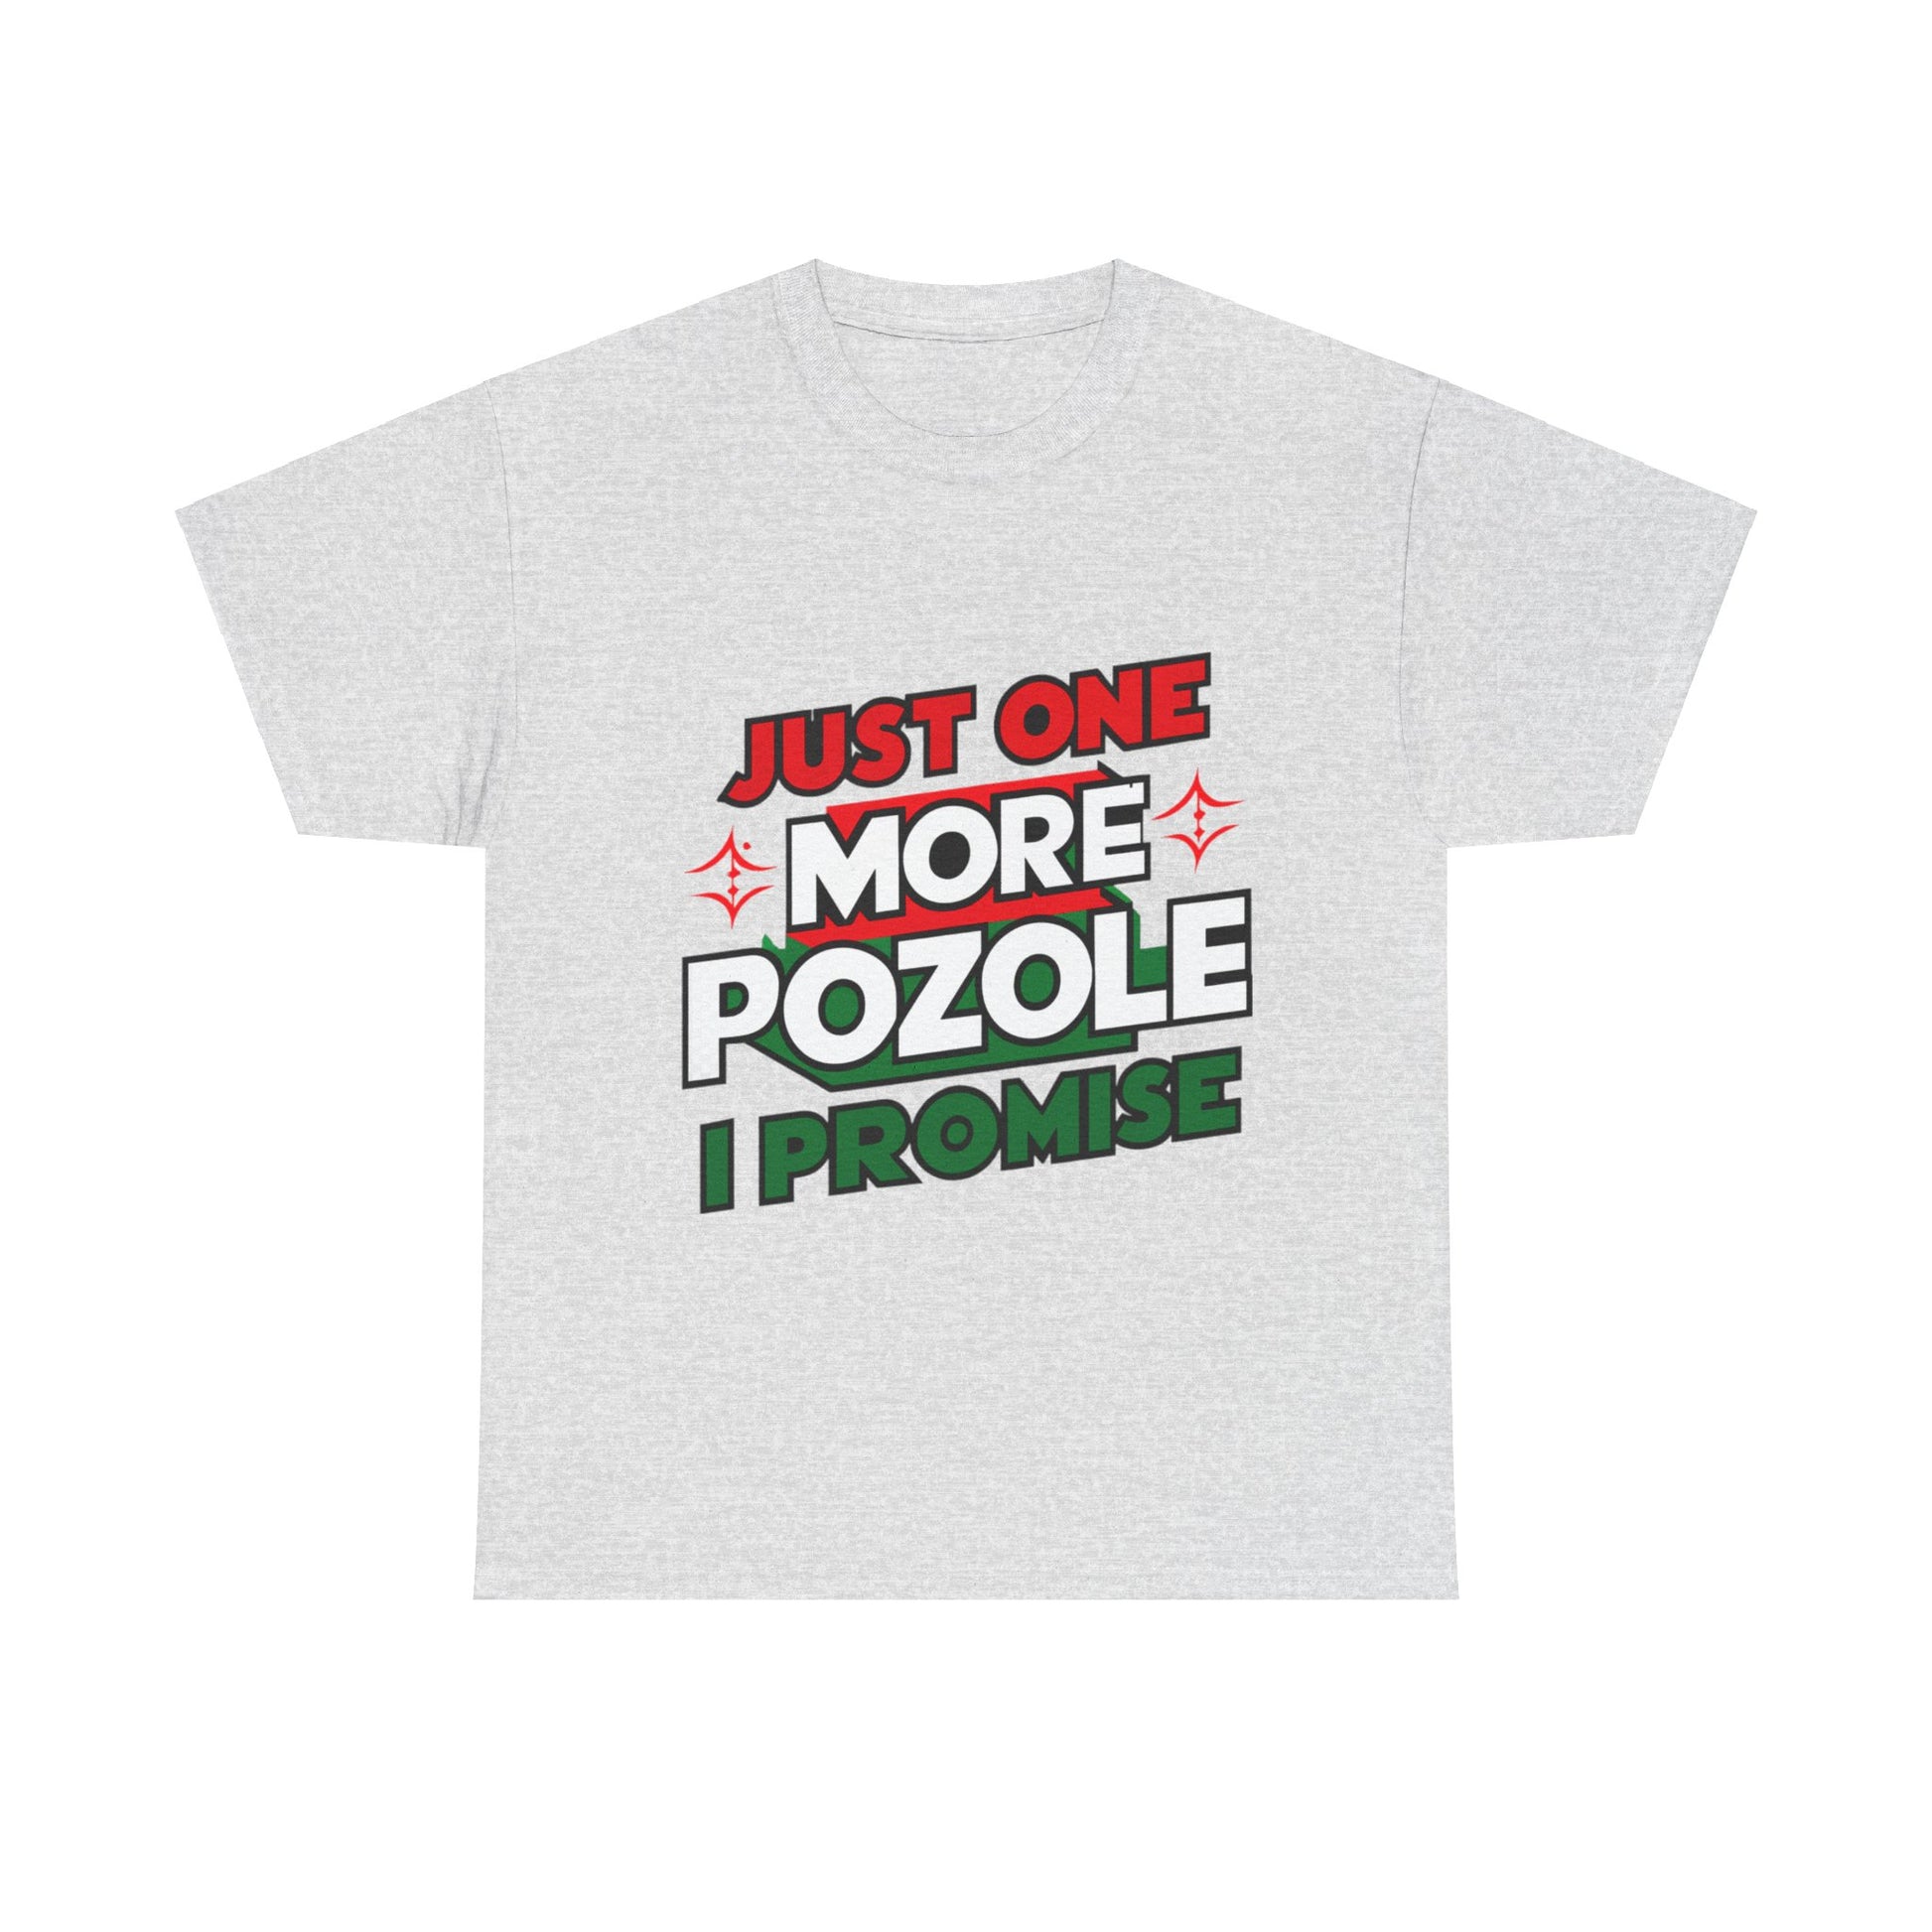 Just One More Pozole I Promise Mexican Food Graphic Unisex Heavy Cotton Tee Cotton Funny Humorous Graphic Soft Premium Unisex Men Women Ash T-shirt Birthday Gift-13